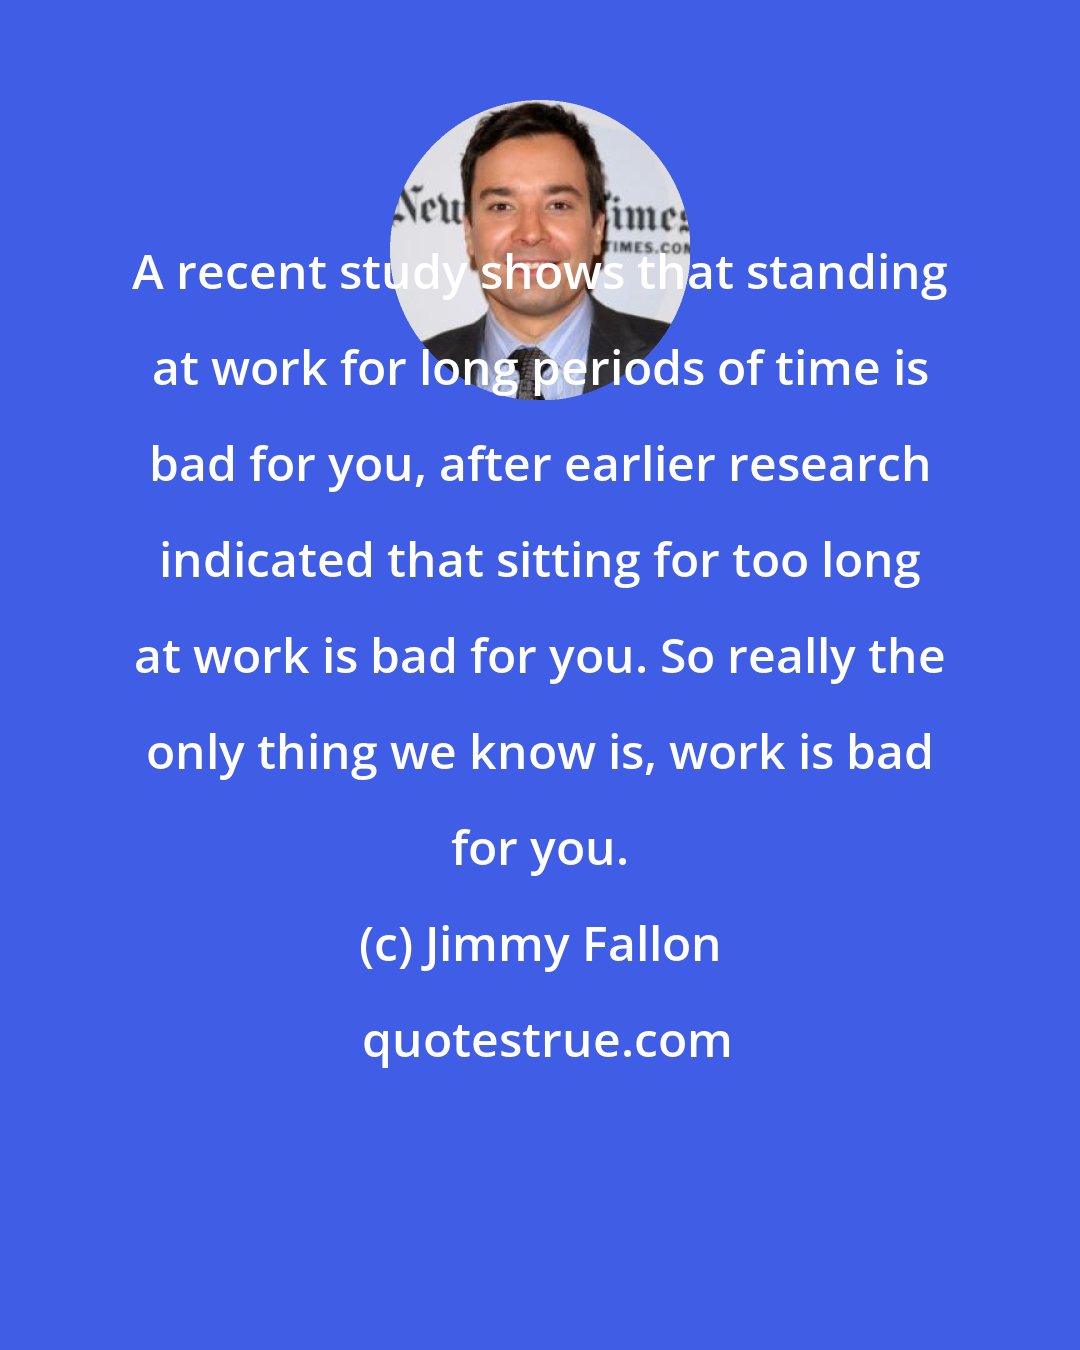 Jimmy Fallon: A recent study shows that standing at work for long periods of time is bad for you, after earlier research indicated that sitting for too long at work is bad for you. So really the only thing we know is, work is bad for you.